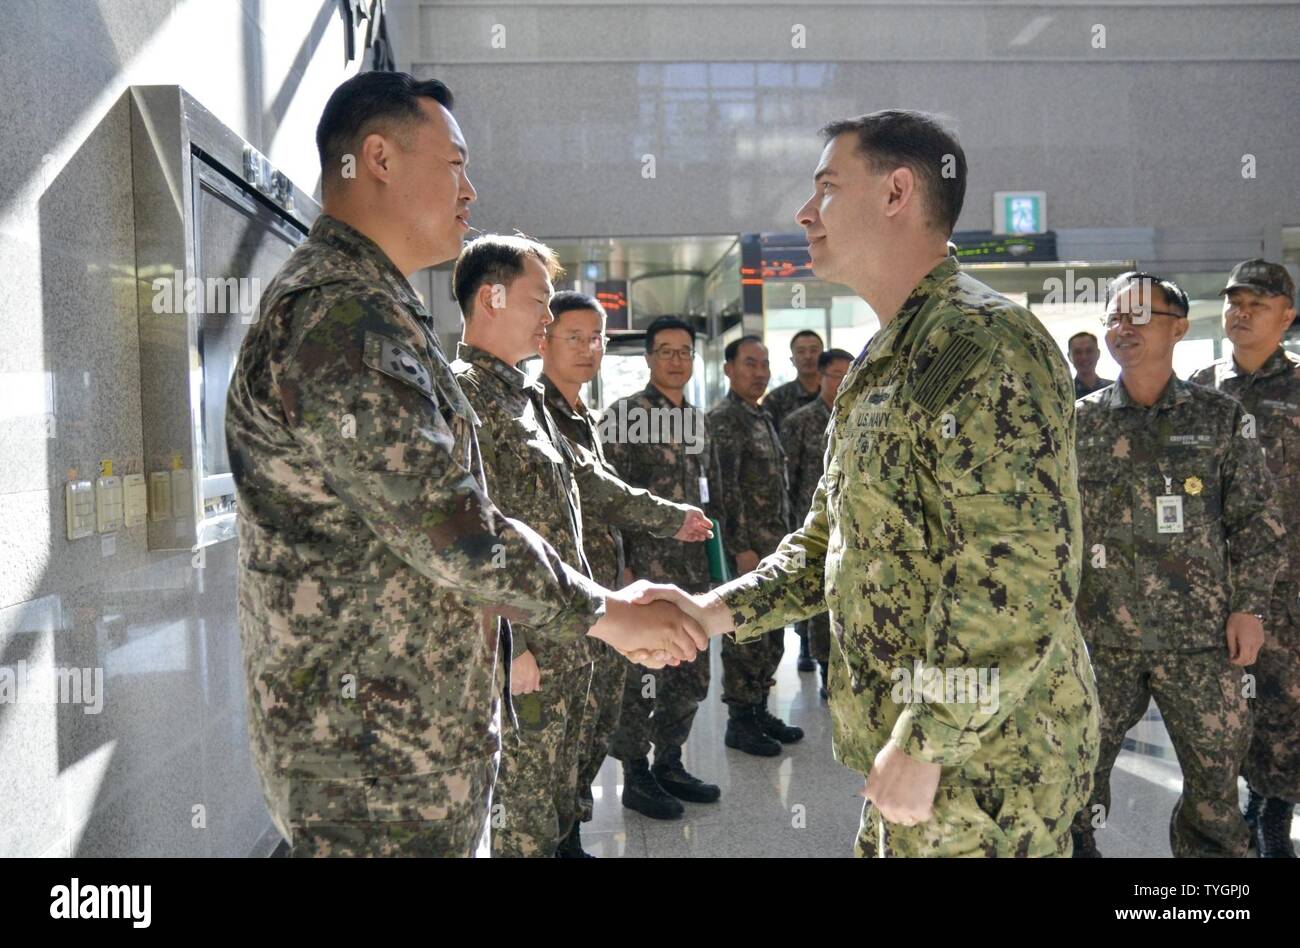 MOKPO, Republic of Korea (Nov. 8, 2016) Rear Adm. Brad Cooper, the commander of U.S. Naval Forces Korea (CNFK) introduces himself to Republic of Korea (ROK) 3rd Fleet department heads during a visit to ROK 3rd Fleet headquarters. CNFK is the U.S. Navy's representative in the ROK, providing leadership and expertise in naval matters to improve institutional and operational effectiveness between the two navies and to strengthen collective security efforts in Korea and the region. Stock Photo